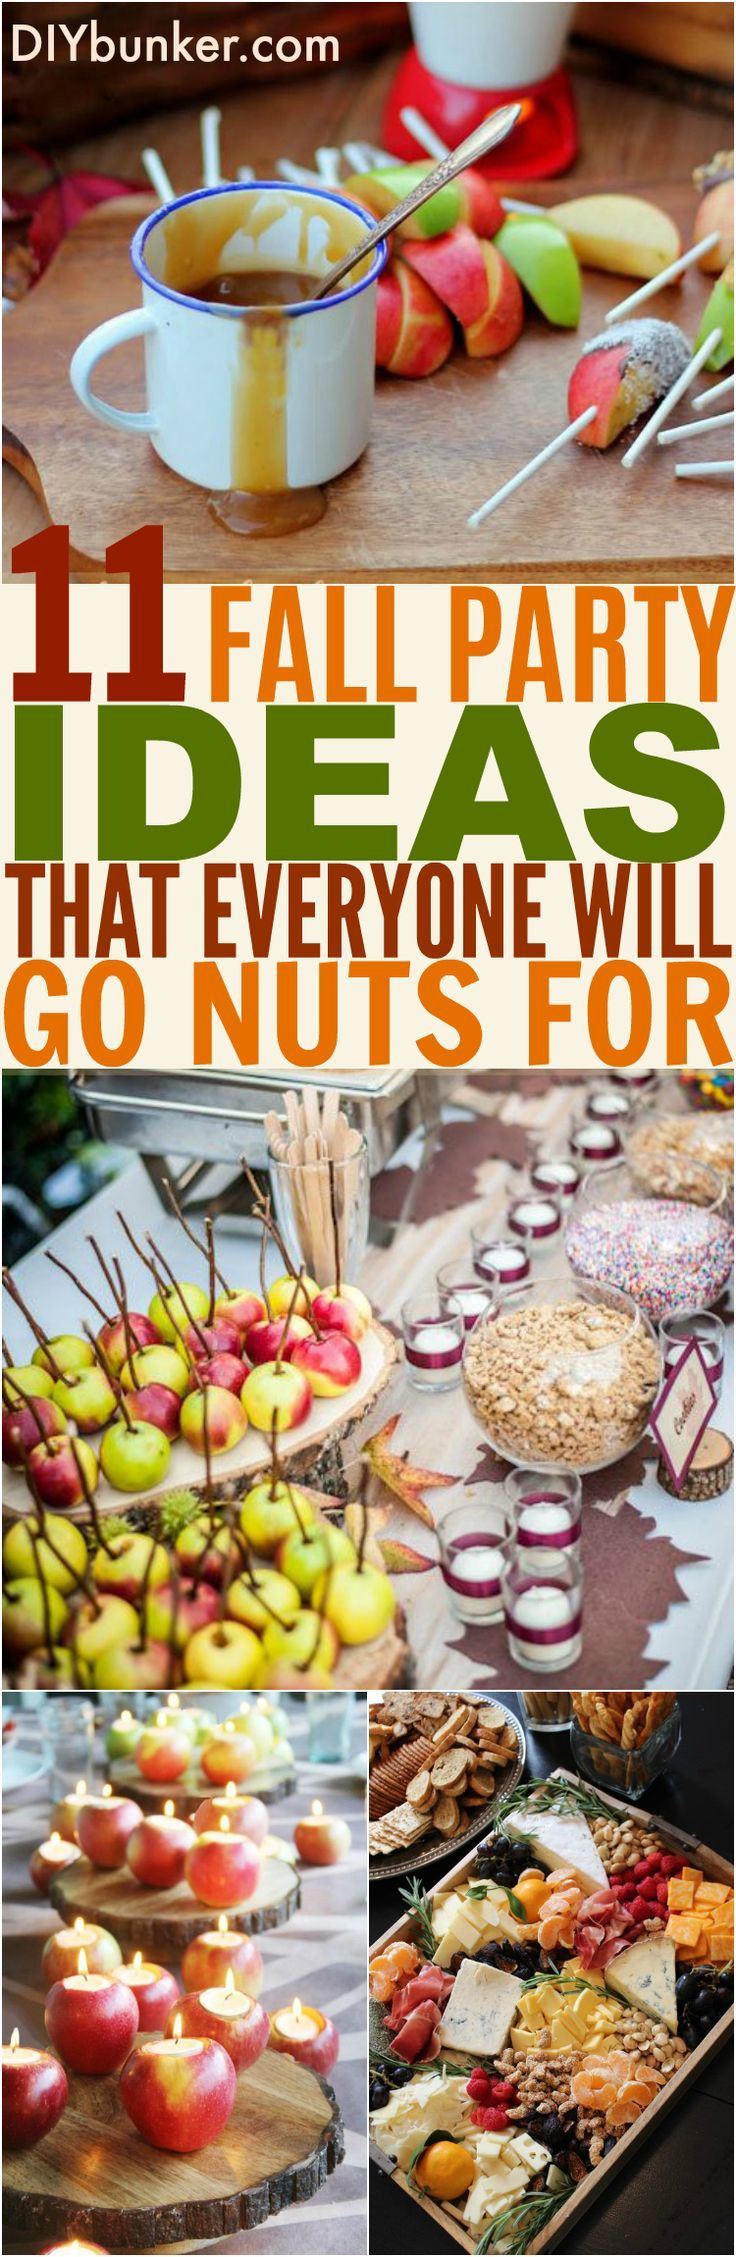 Fall Festival Ideas For Adults
 Best 25 Fall party themes ideas on Pinterest